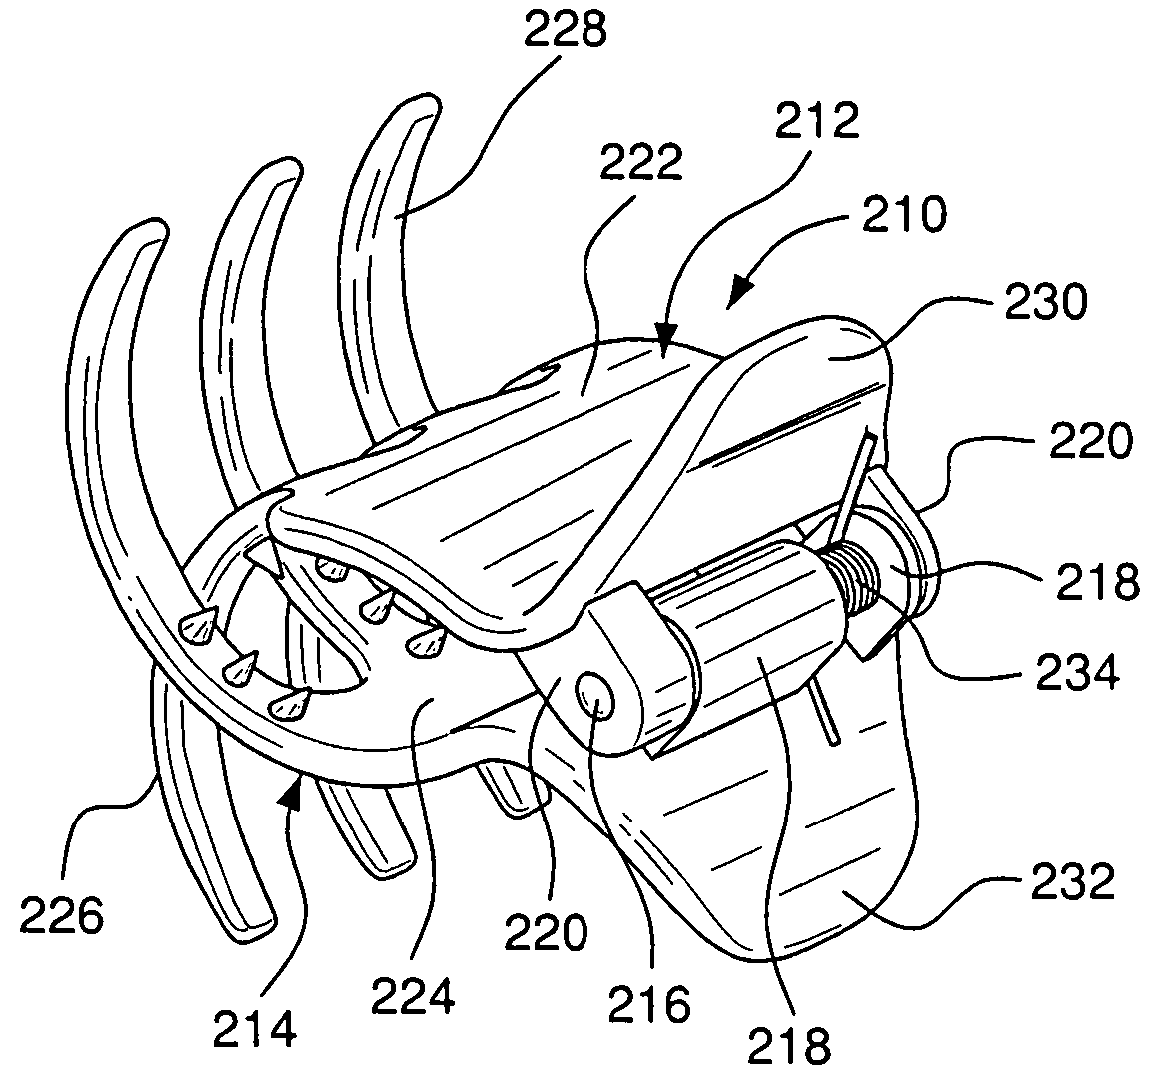 Adjustable hair holding device